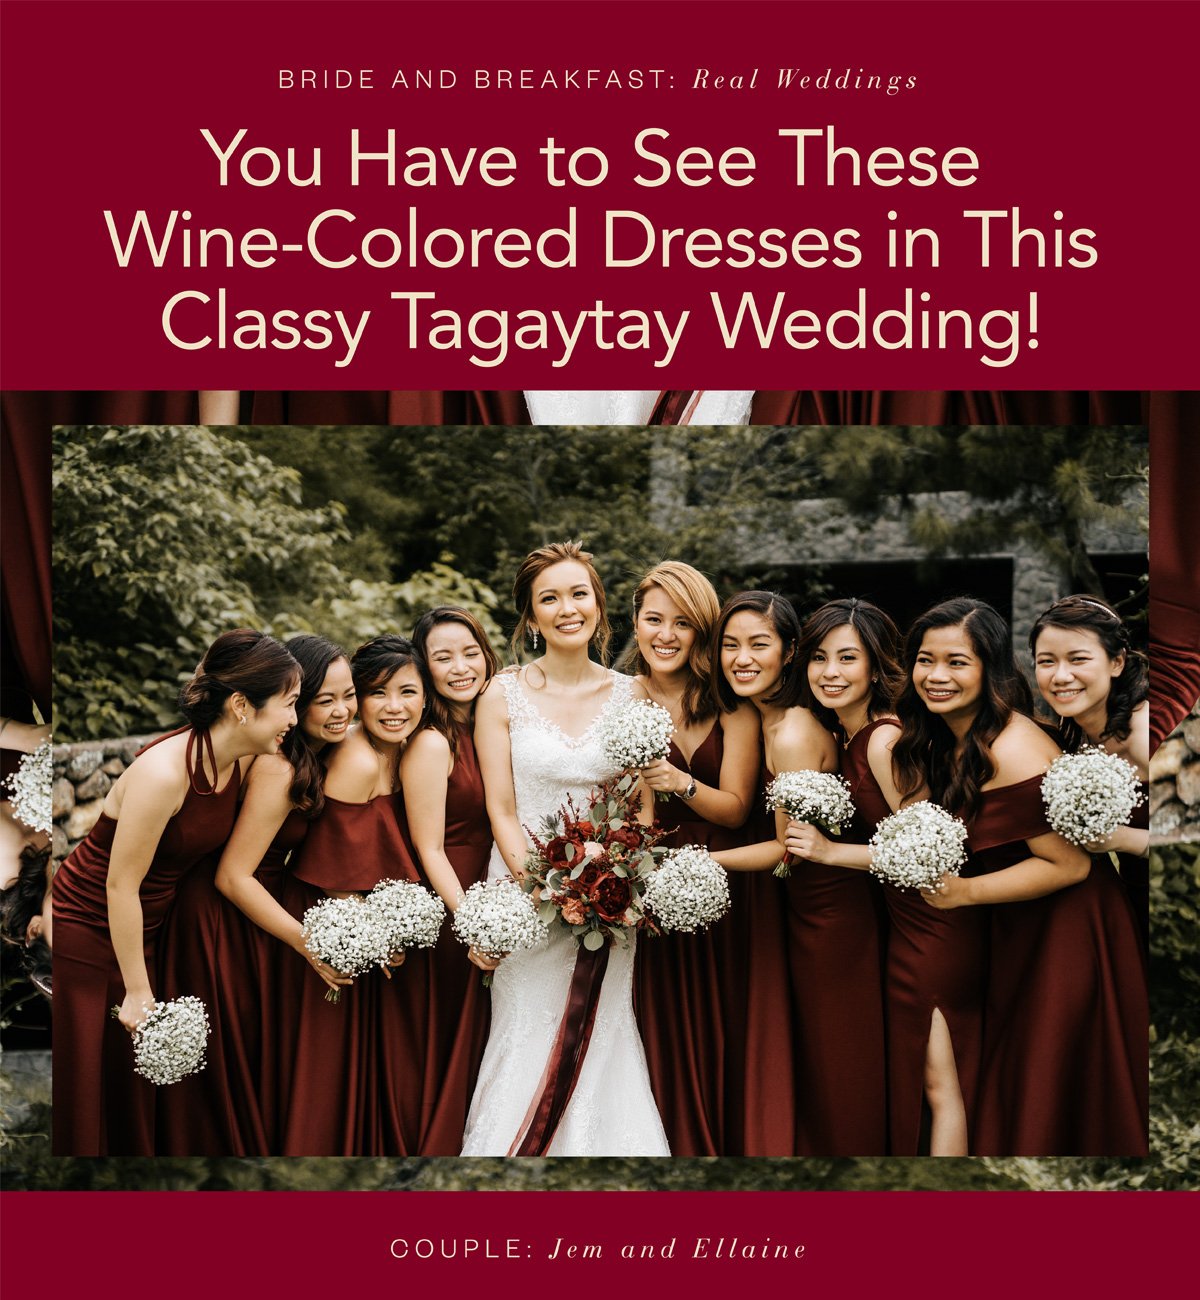 You Have to See These Wine-Colored Dresses in This Classy Tagaytay Wedding!